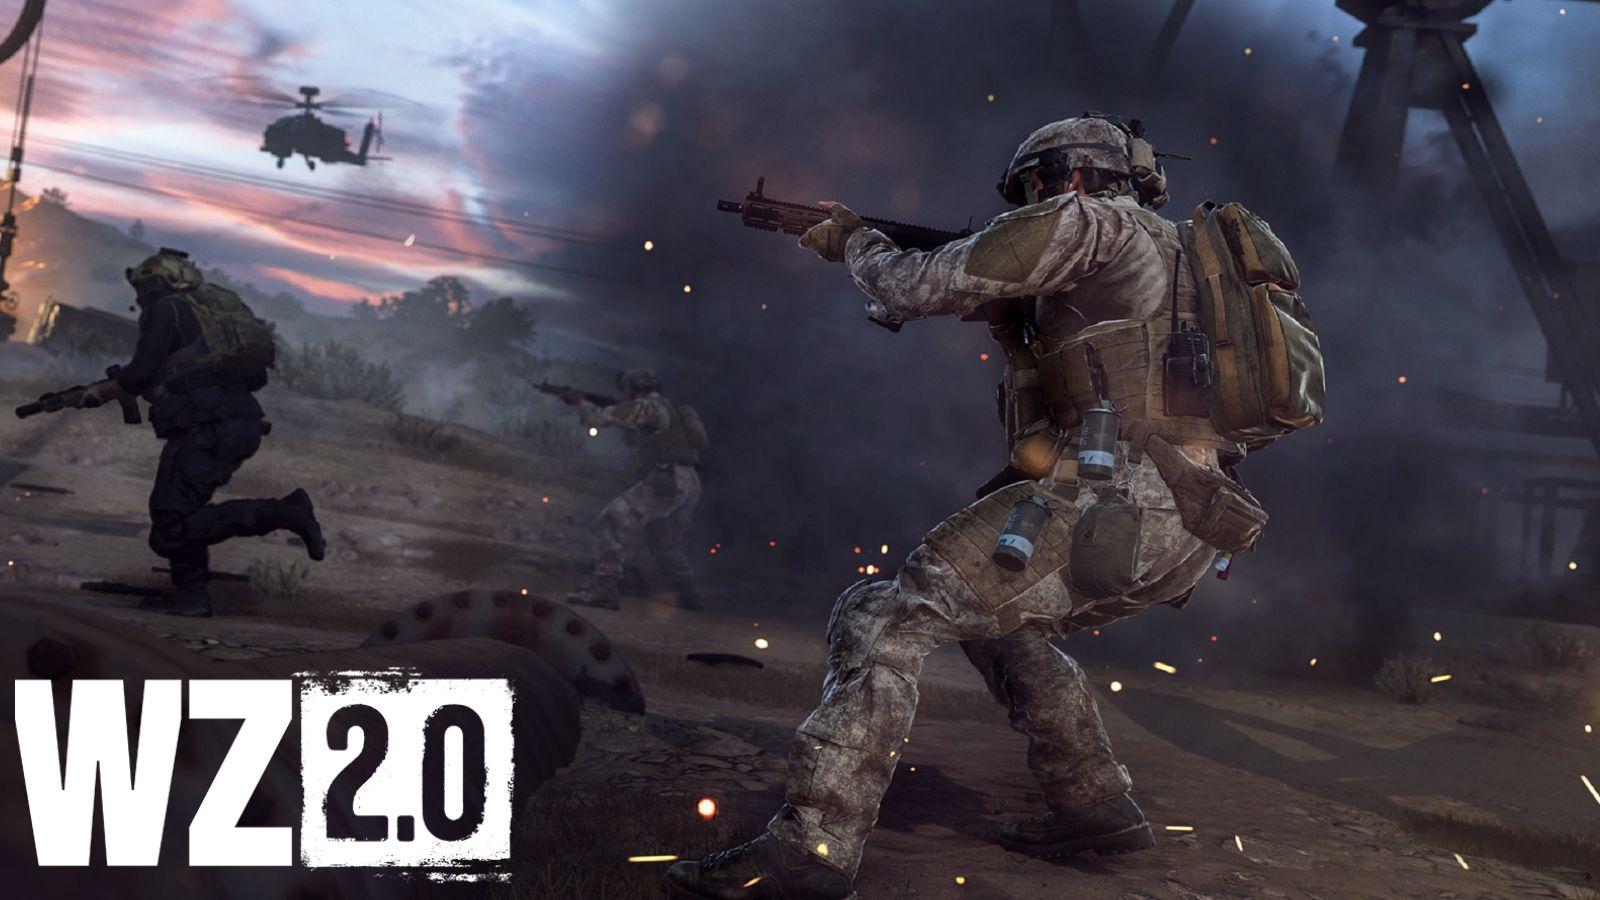 Modern Warfare 2 and Warzone 2.0 Battle Pass Introduces a New